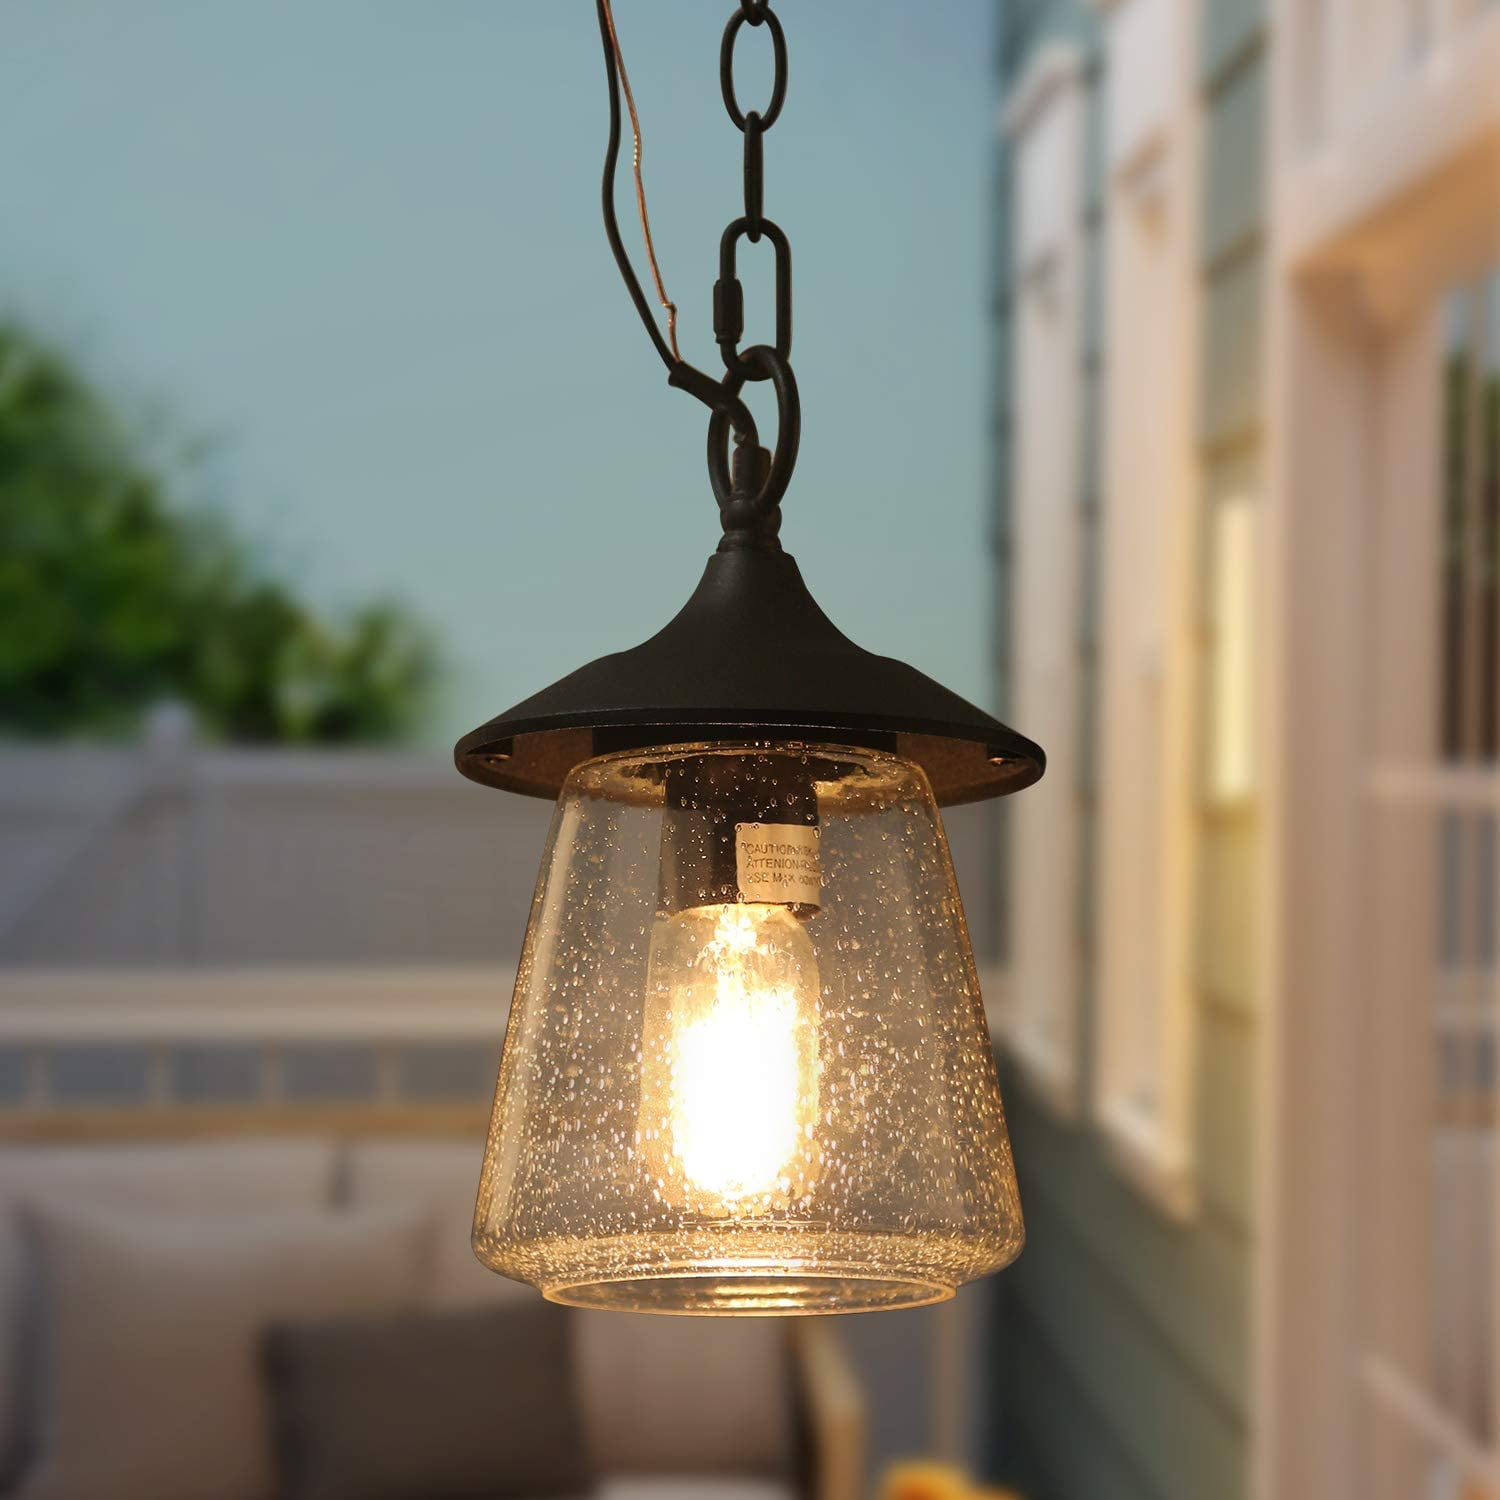 9.4 Hanging Lamp for Porch A03355 Log Barn 1 Light Outdoor Lantern Pendant Lighting in Painted Black Metal with Clear Bubbled Glass Globe 